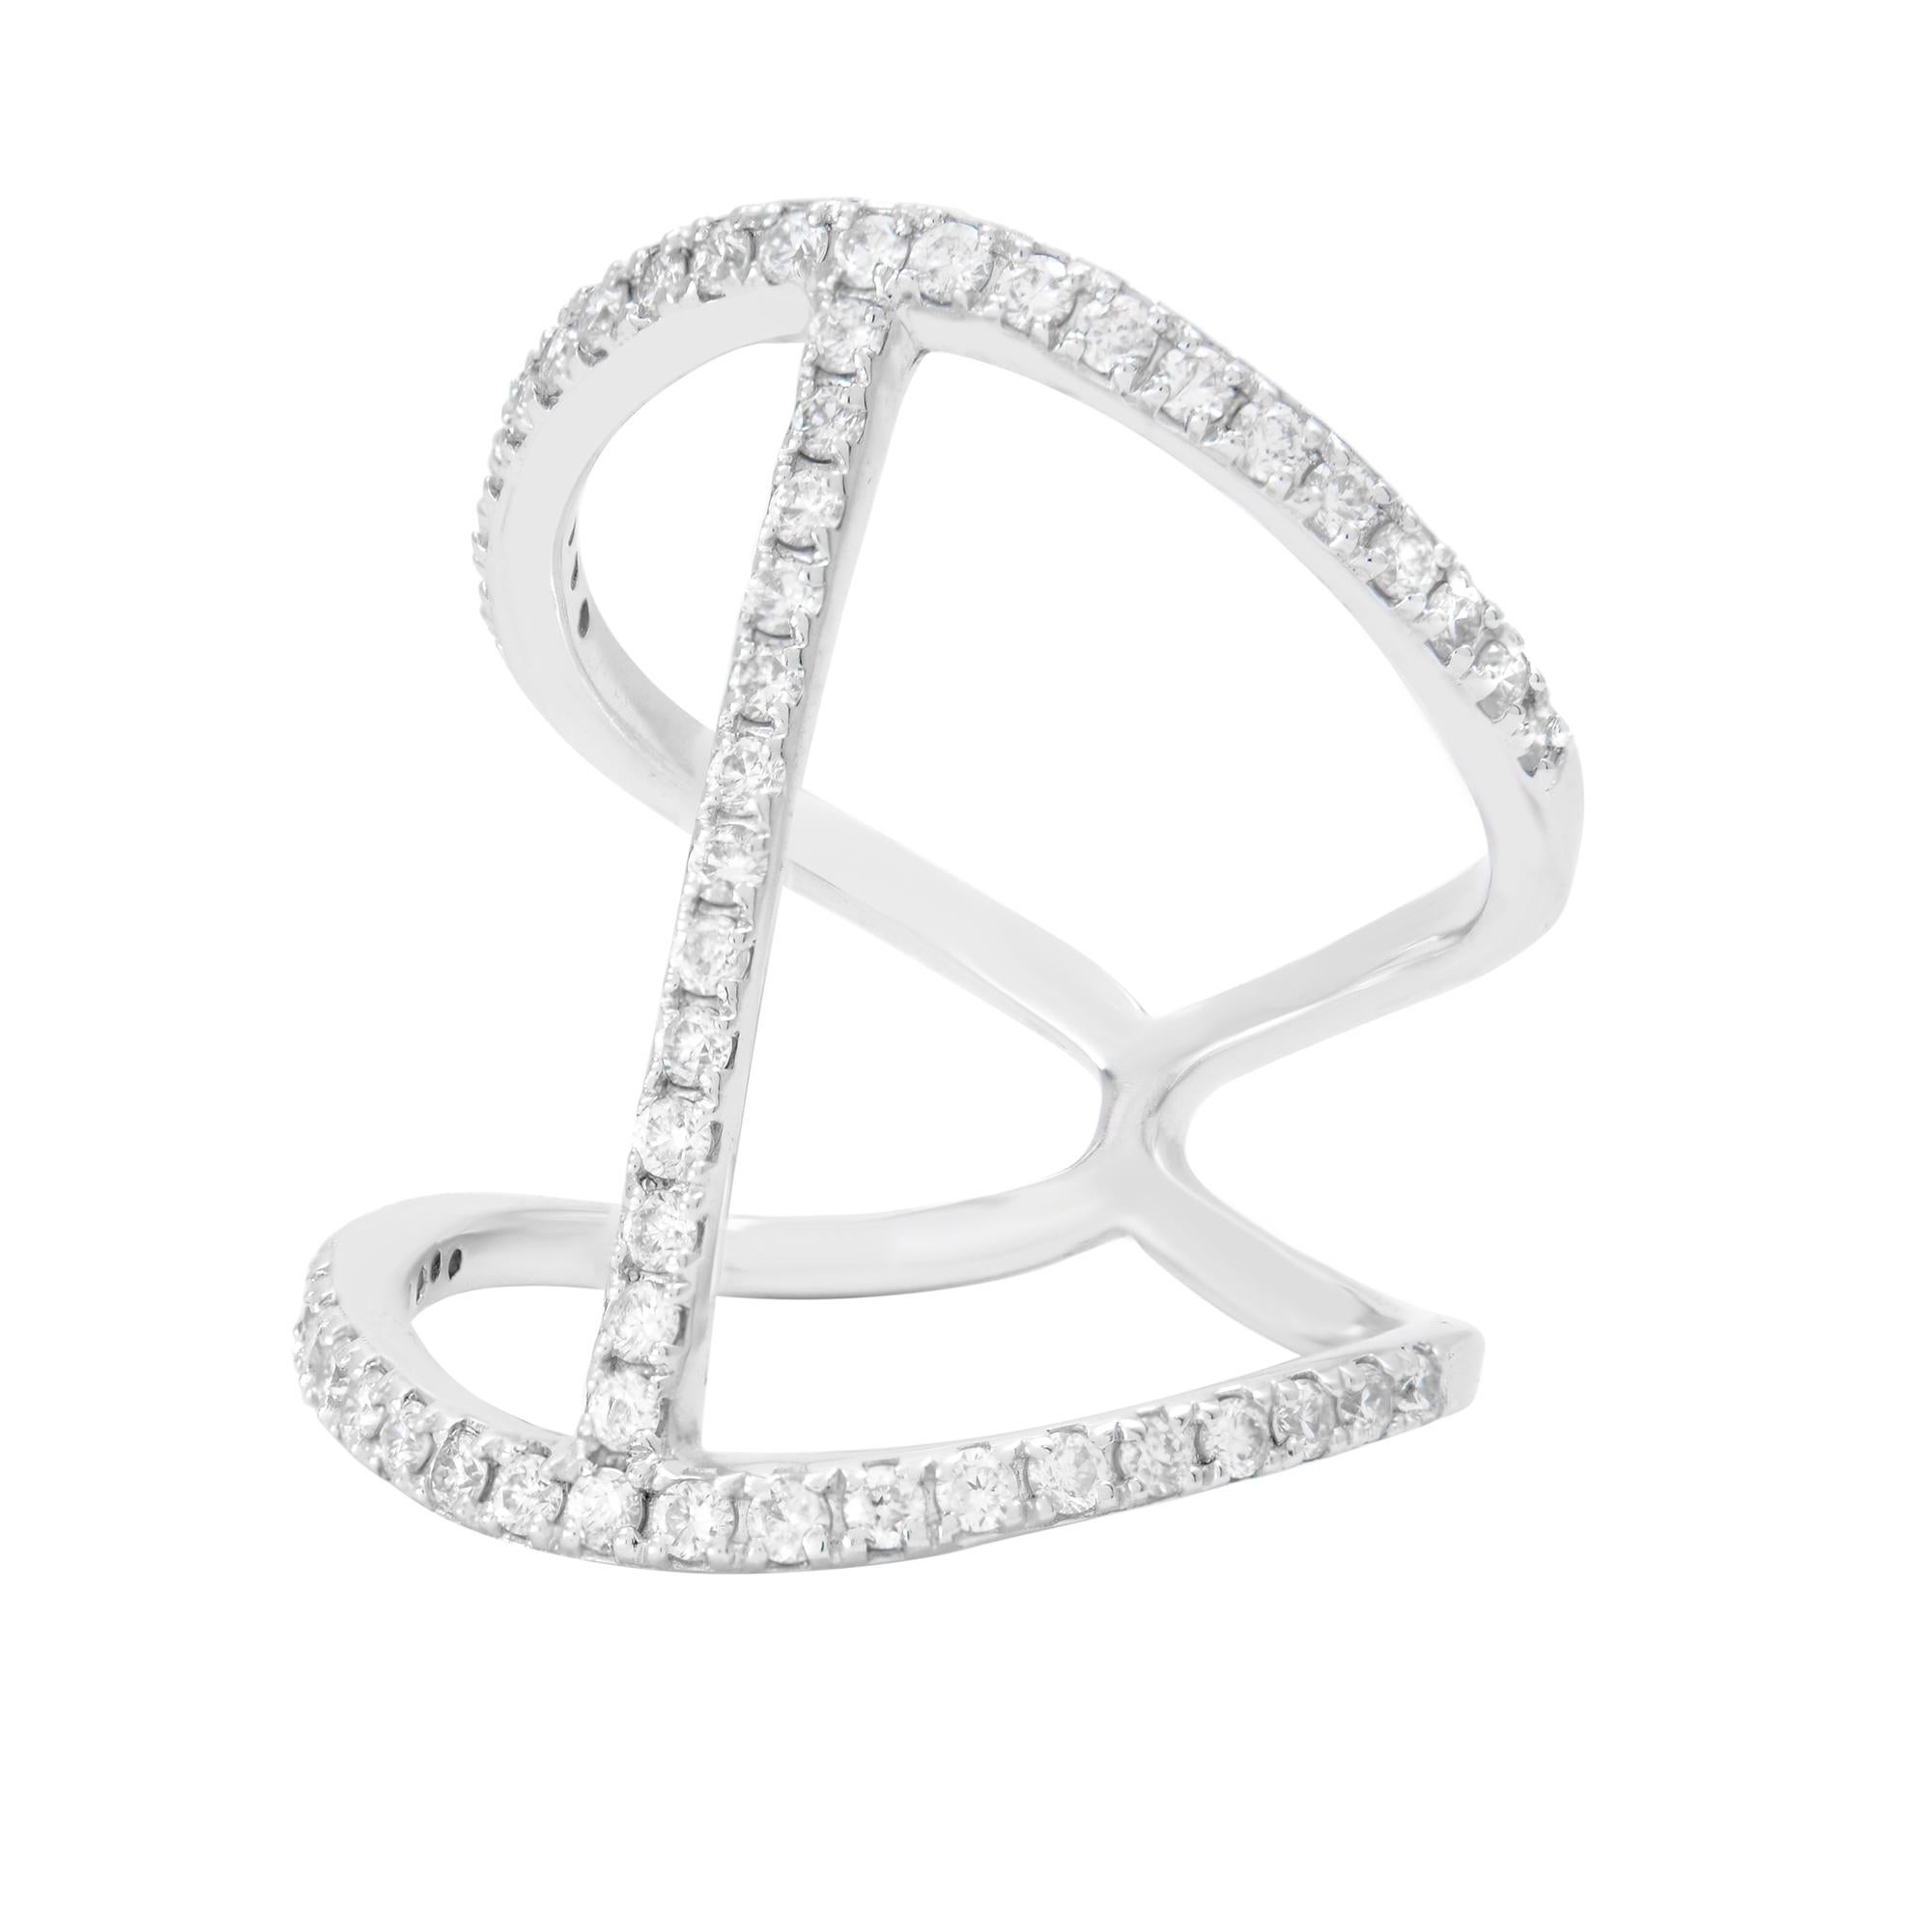 This stunning diamond double band guard designed ring is crafted in 14k white gold and set with 0.64cttw tiny round brilliant cut diamonds. Diamond color G and VS-SI clarity. This unique ring is very chic and stylish. Looks great alone or with other